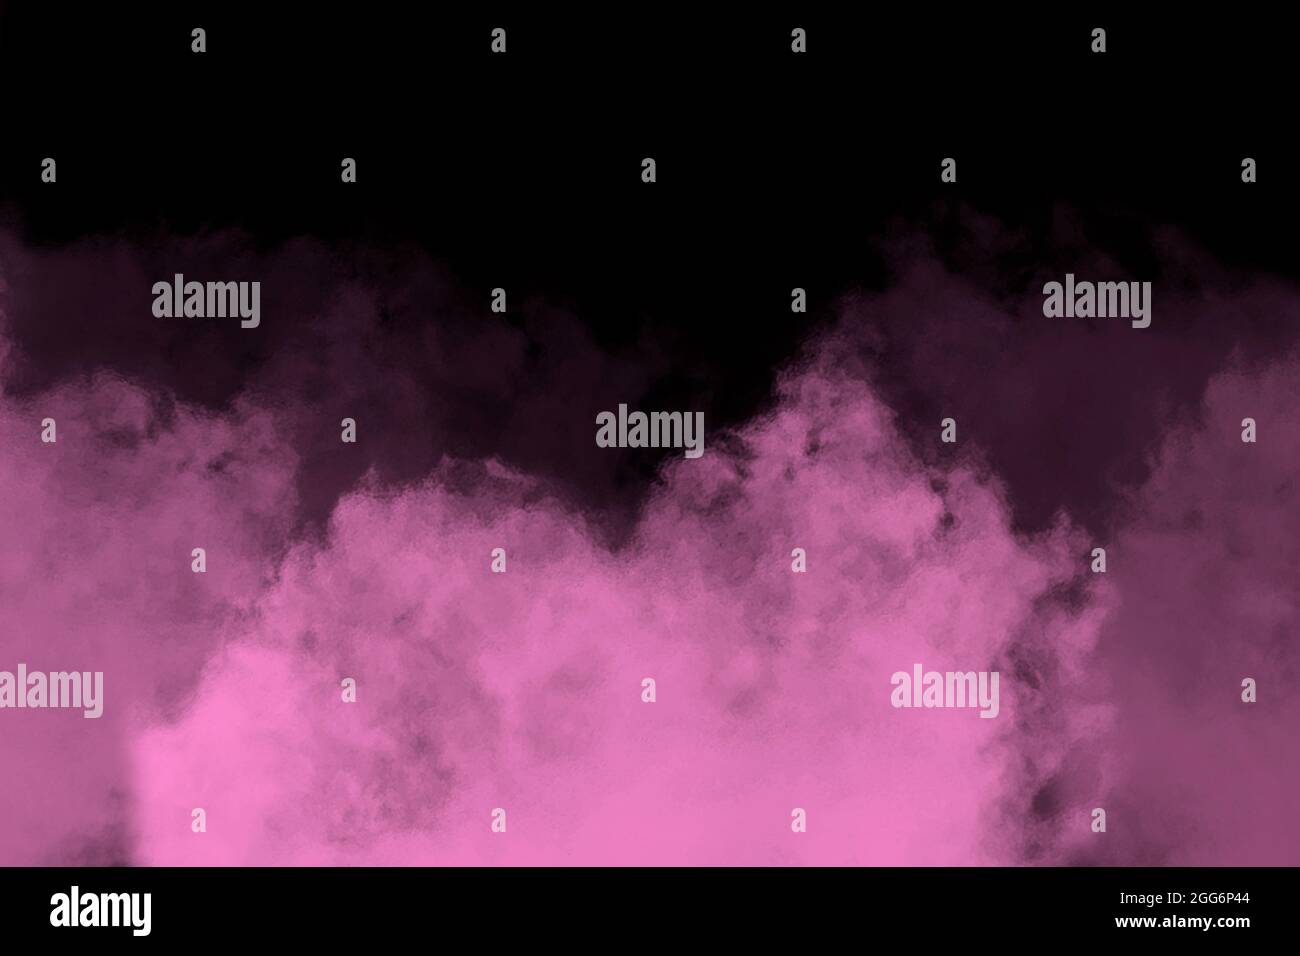 This is a pink smoke or fog overlay to create a special effect on photos and designs Stock Photo